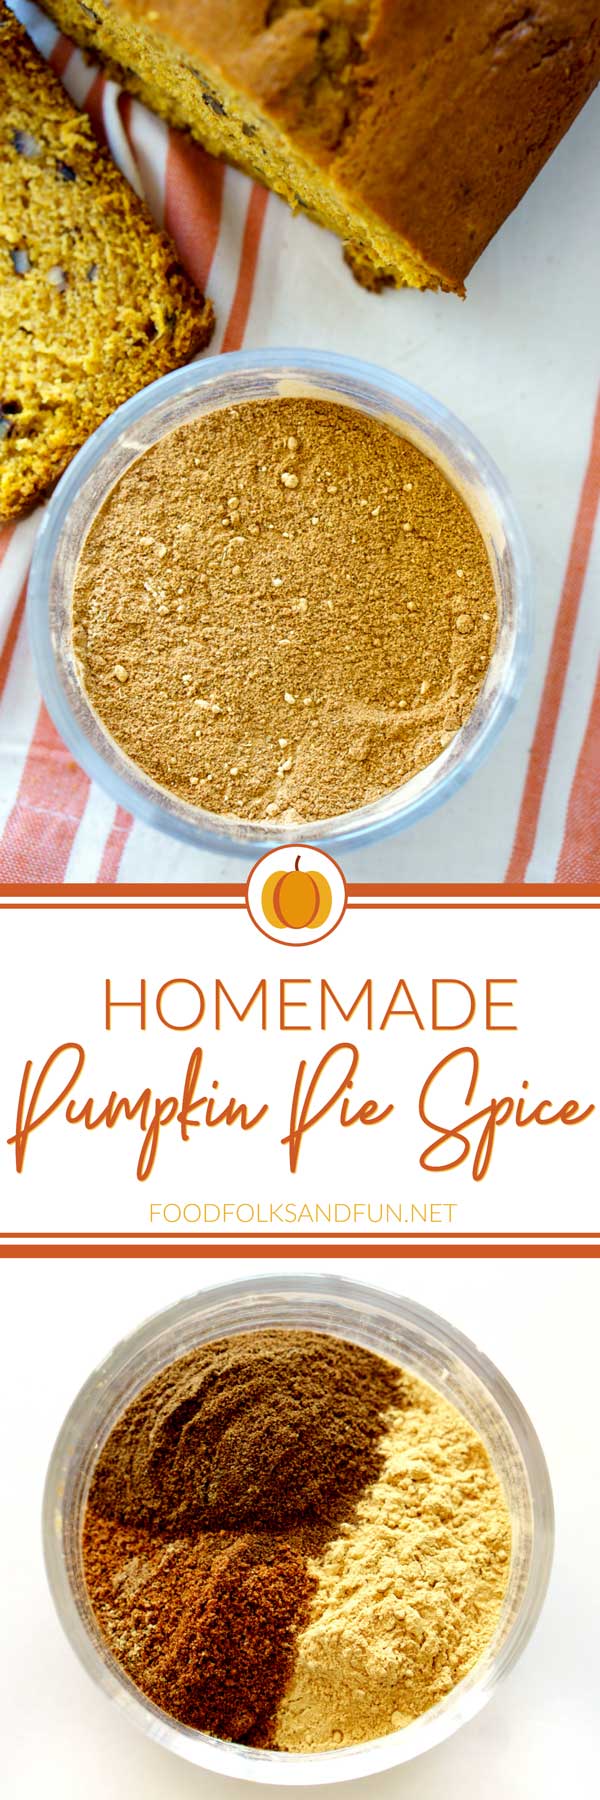 Making Homemade Pumpkin Pie Spice is simple and it saves a lot of money, too! It's my go-to spice blend for Fall. via @foodfolksandfun